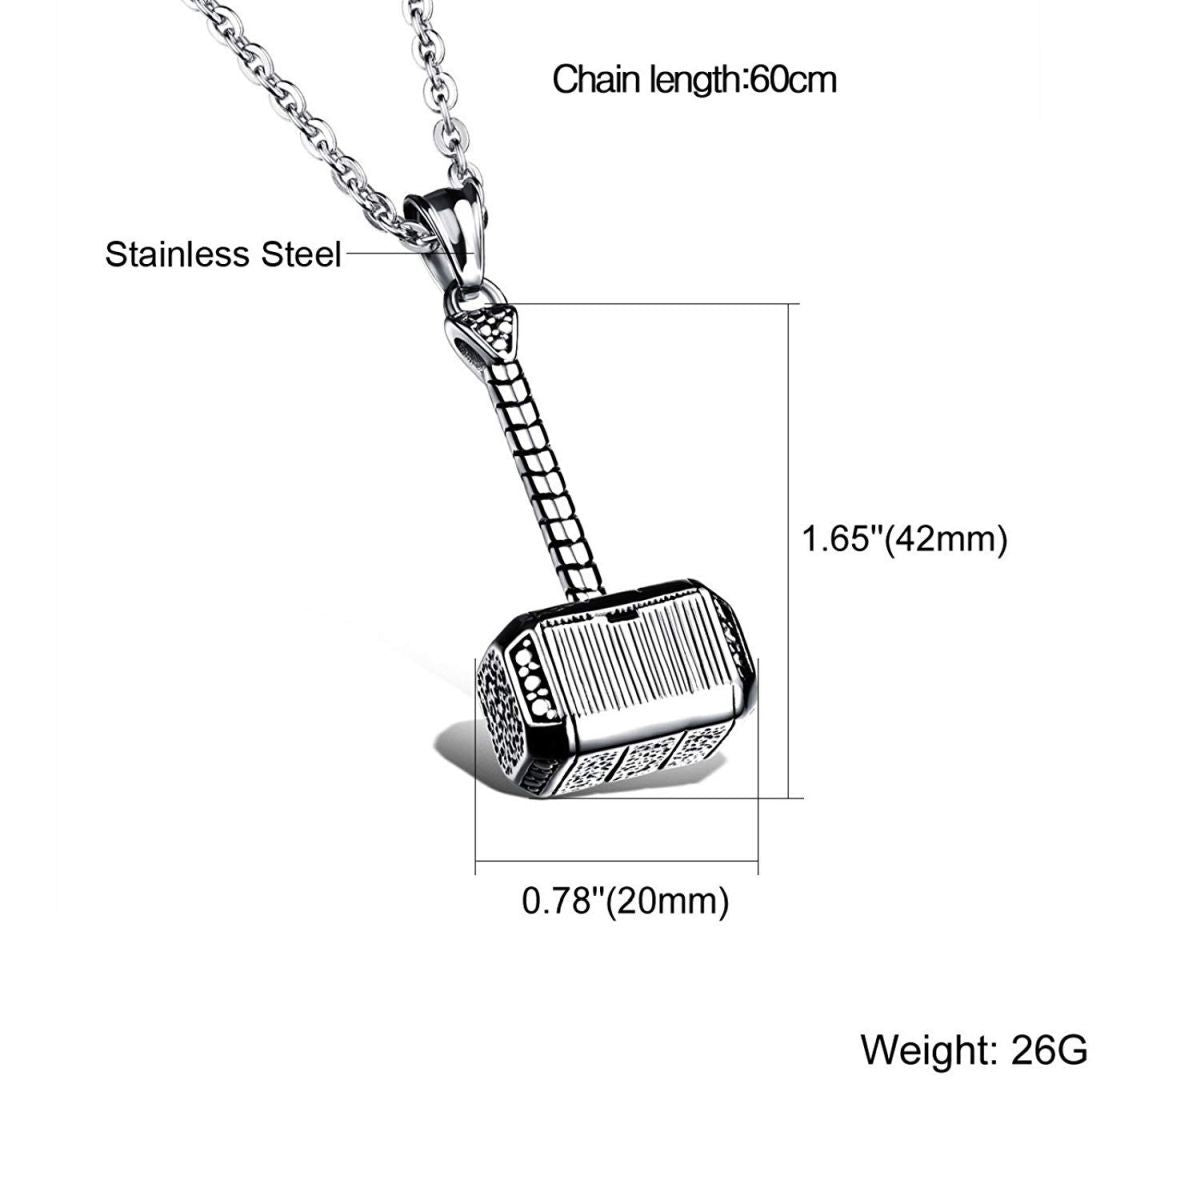 Hammer Silver 316L Surgical Stainless Steel Pendant Necklace Chain